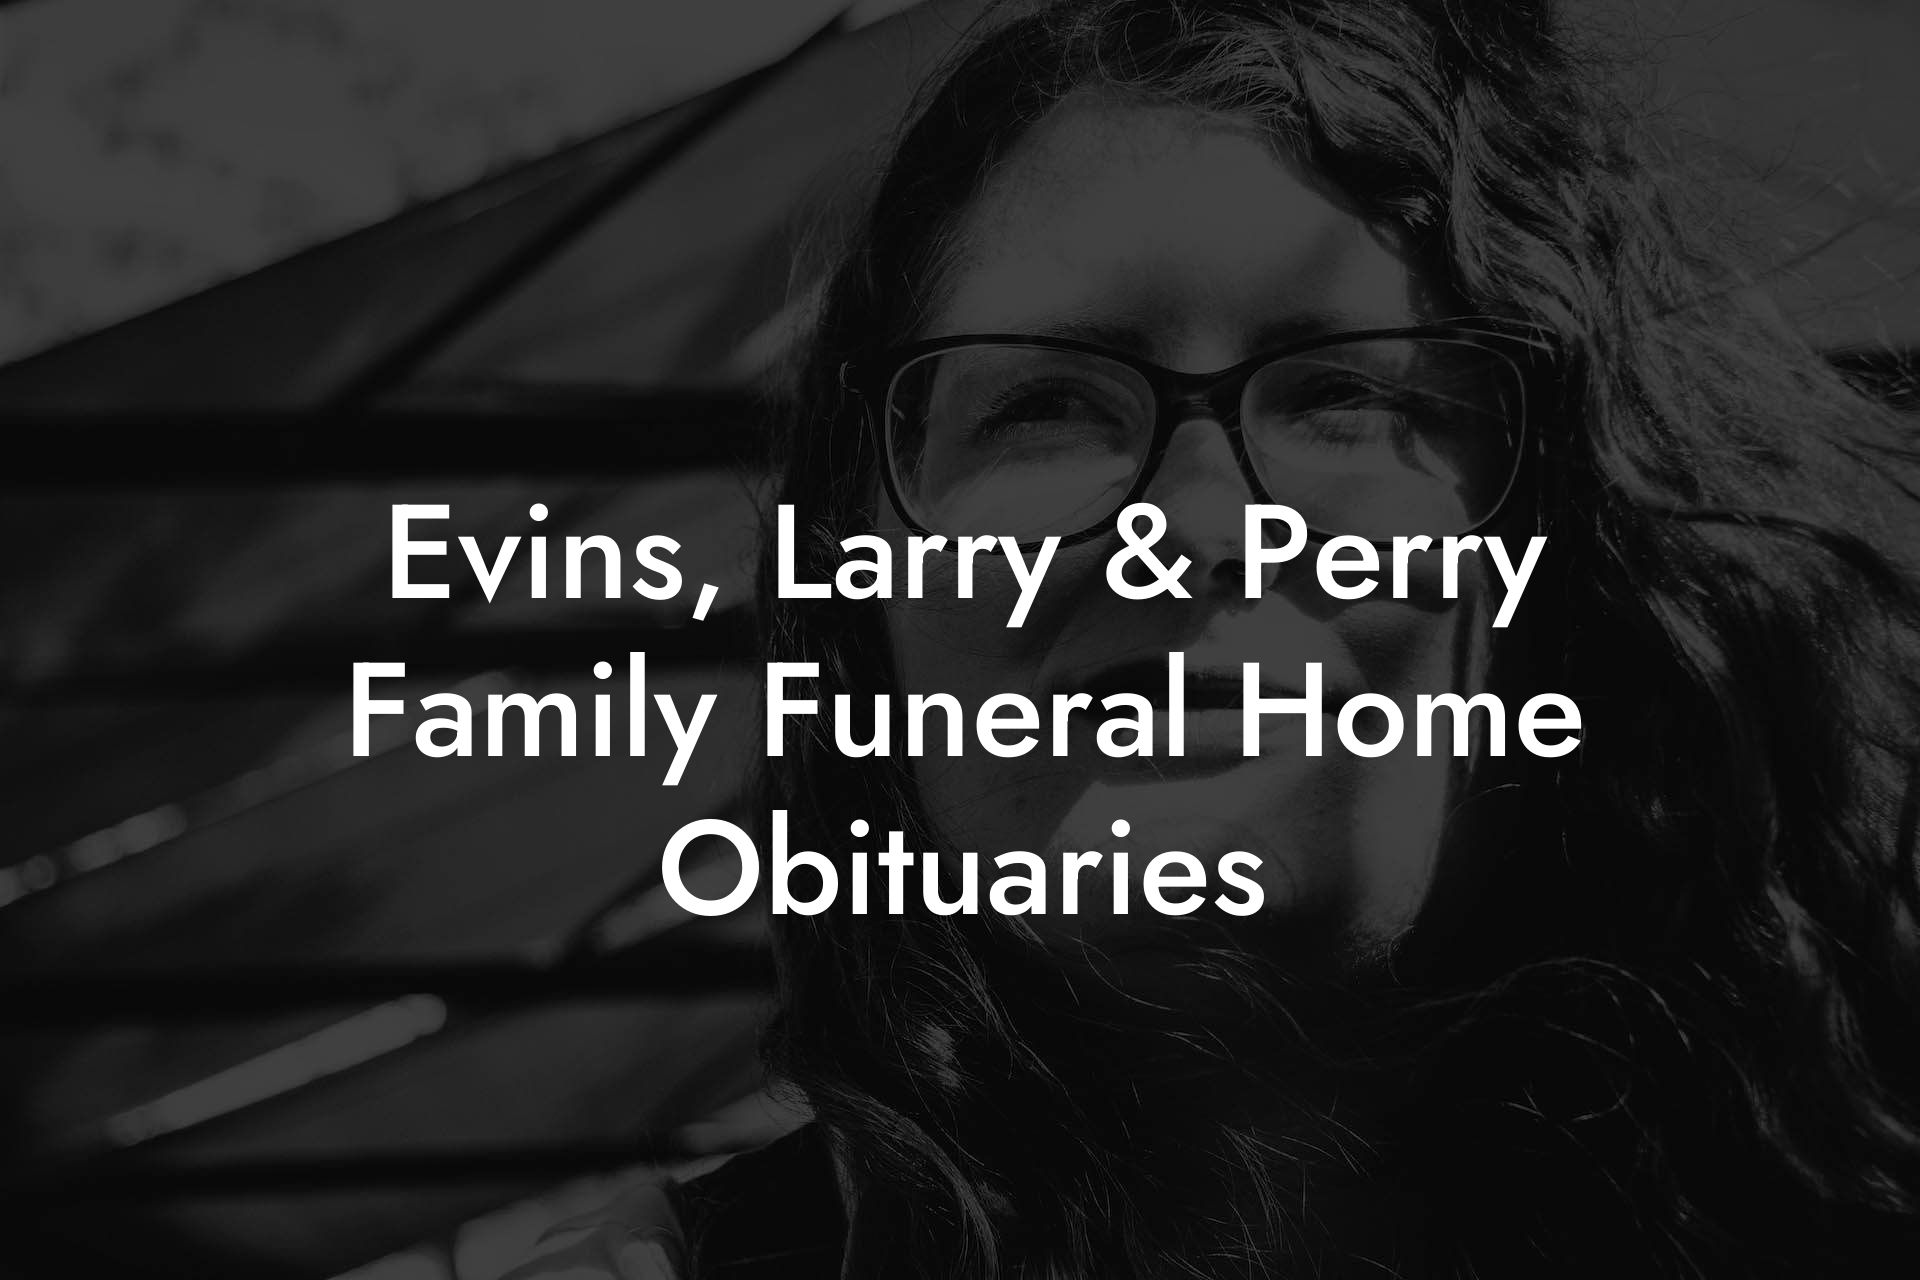 Evins, Larry & Perry Family Funeral Home Obituaries